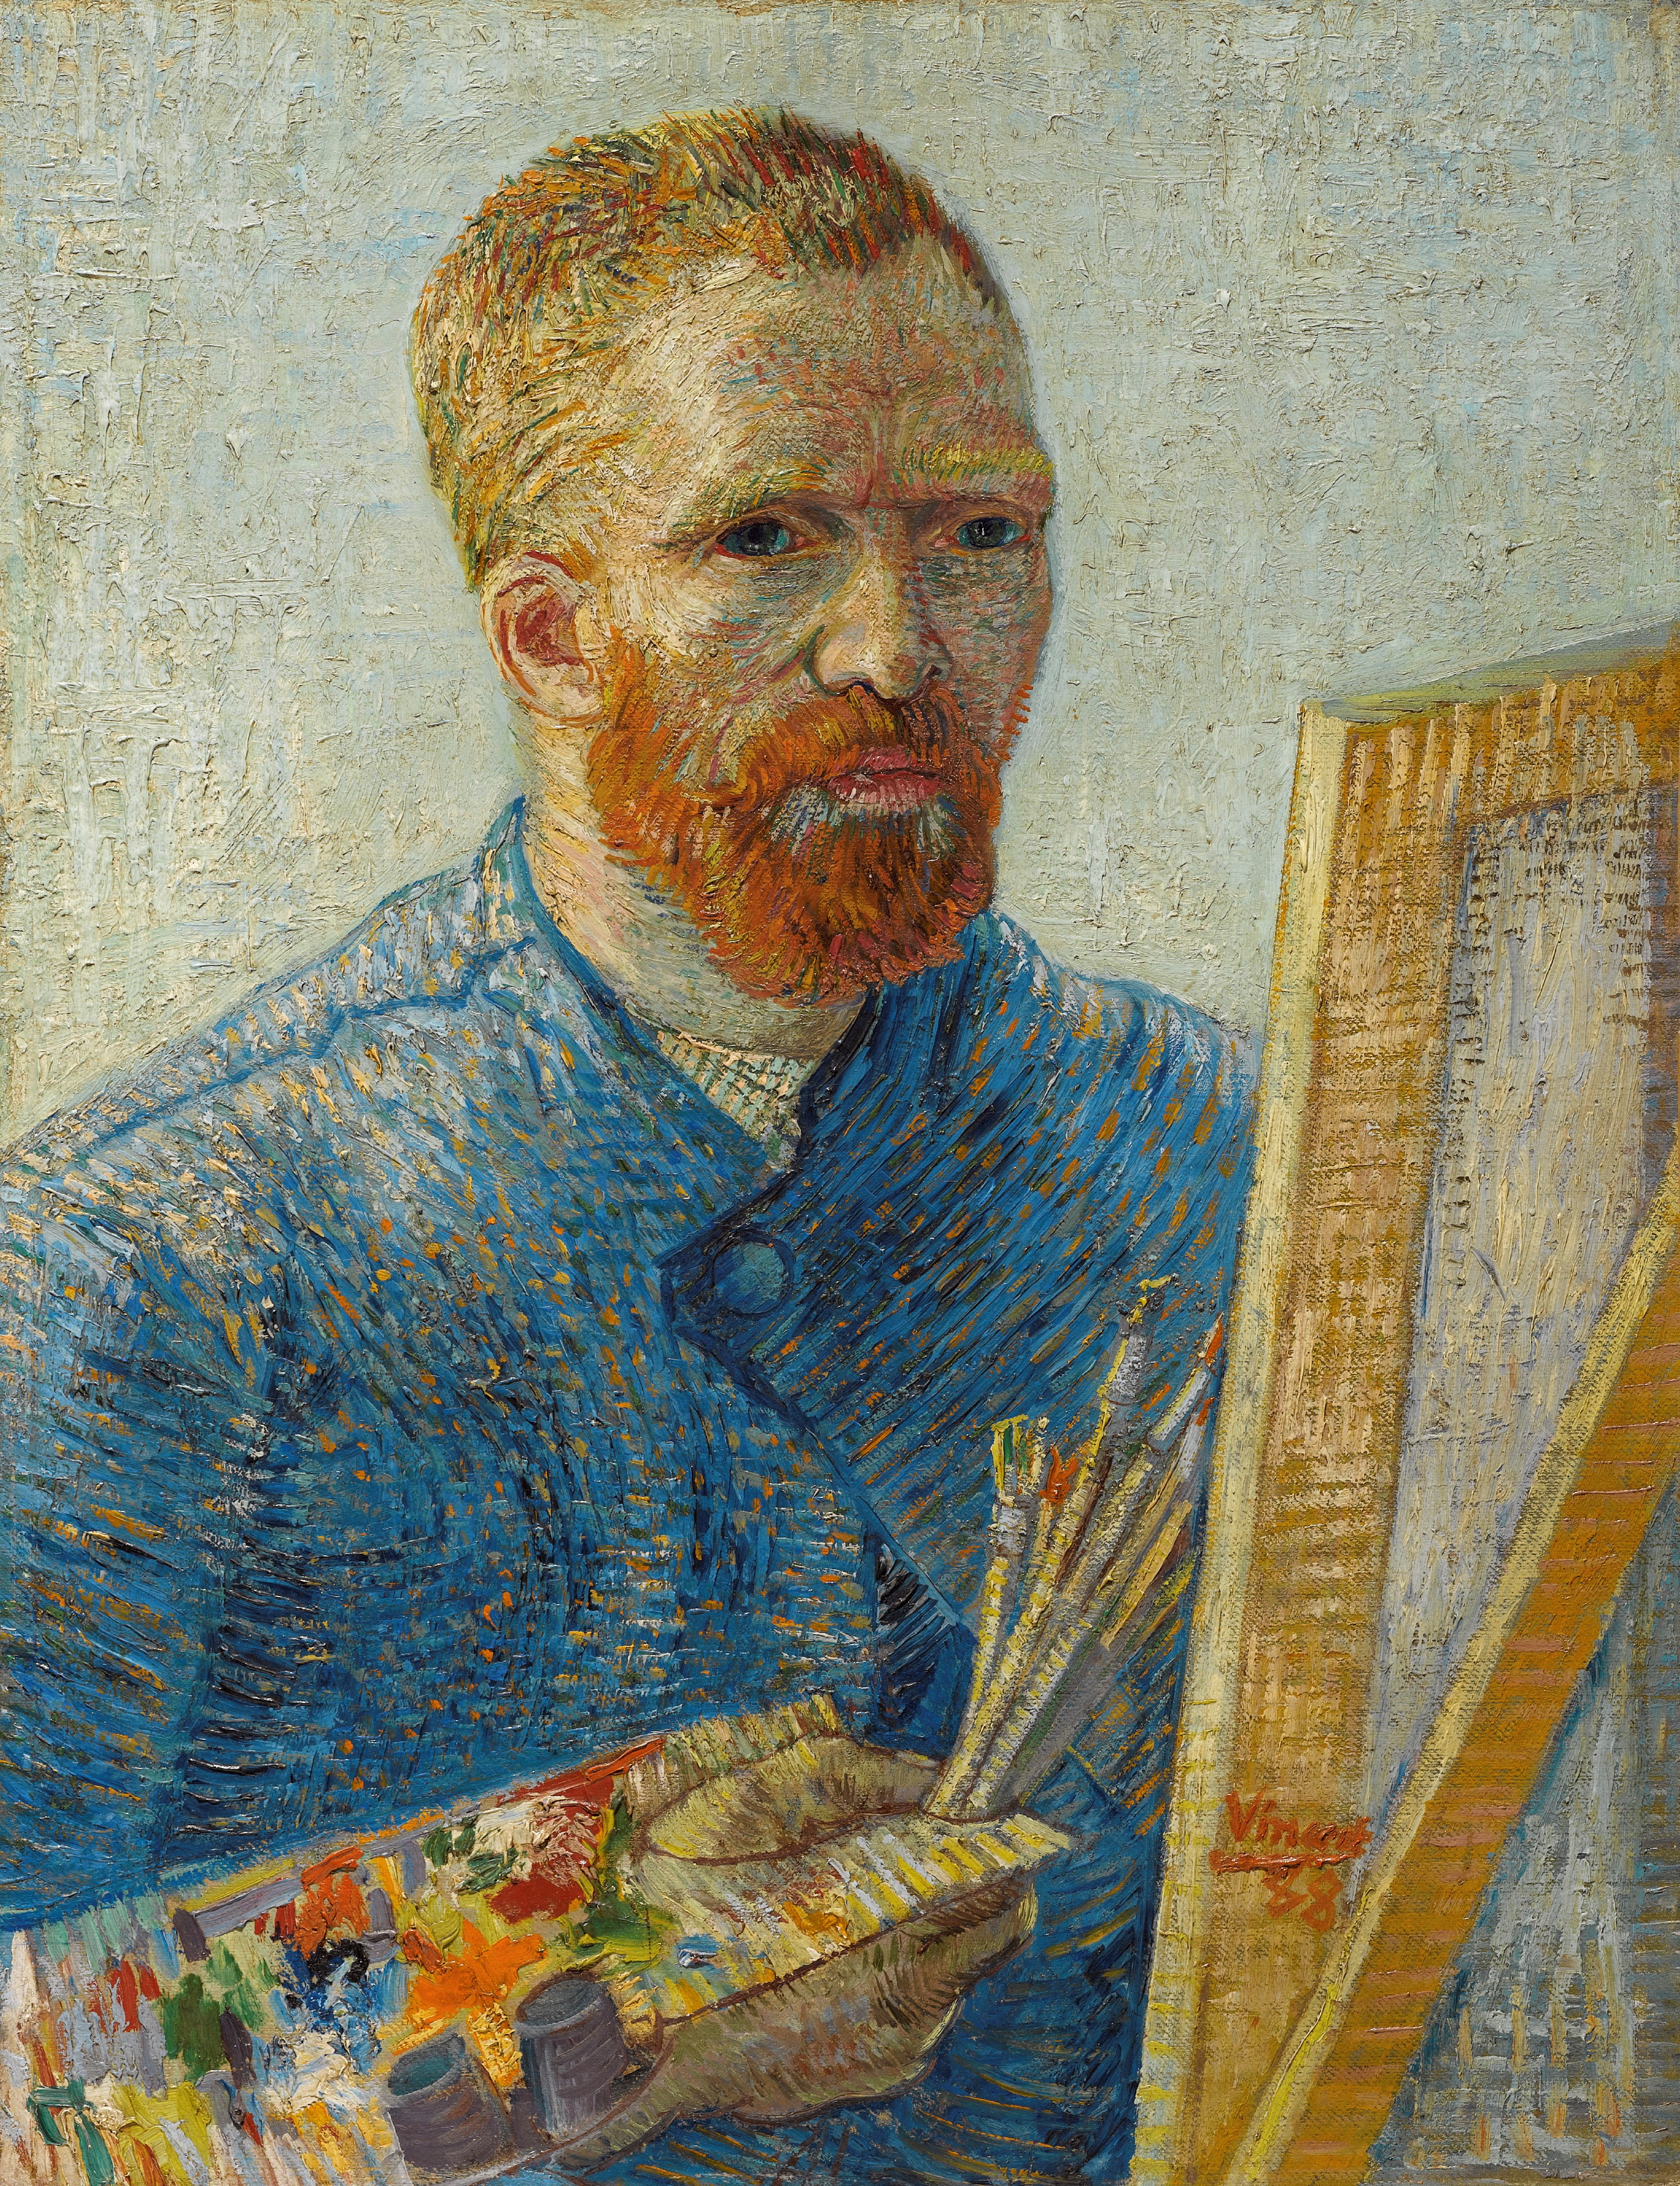 Self-portrait as a painter from 1888 by Vincent van Gogh (1853-1890) obtained on June 30, 2021. Courtesy of The Courtauld/Handout via REUTERS THIS IMAGE HAS BEEN SUPPLIED BY A THIRD PARTY. NO NEW USES AFTER JULY 30, 2021.